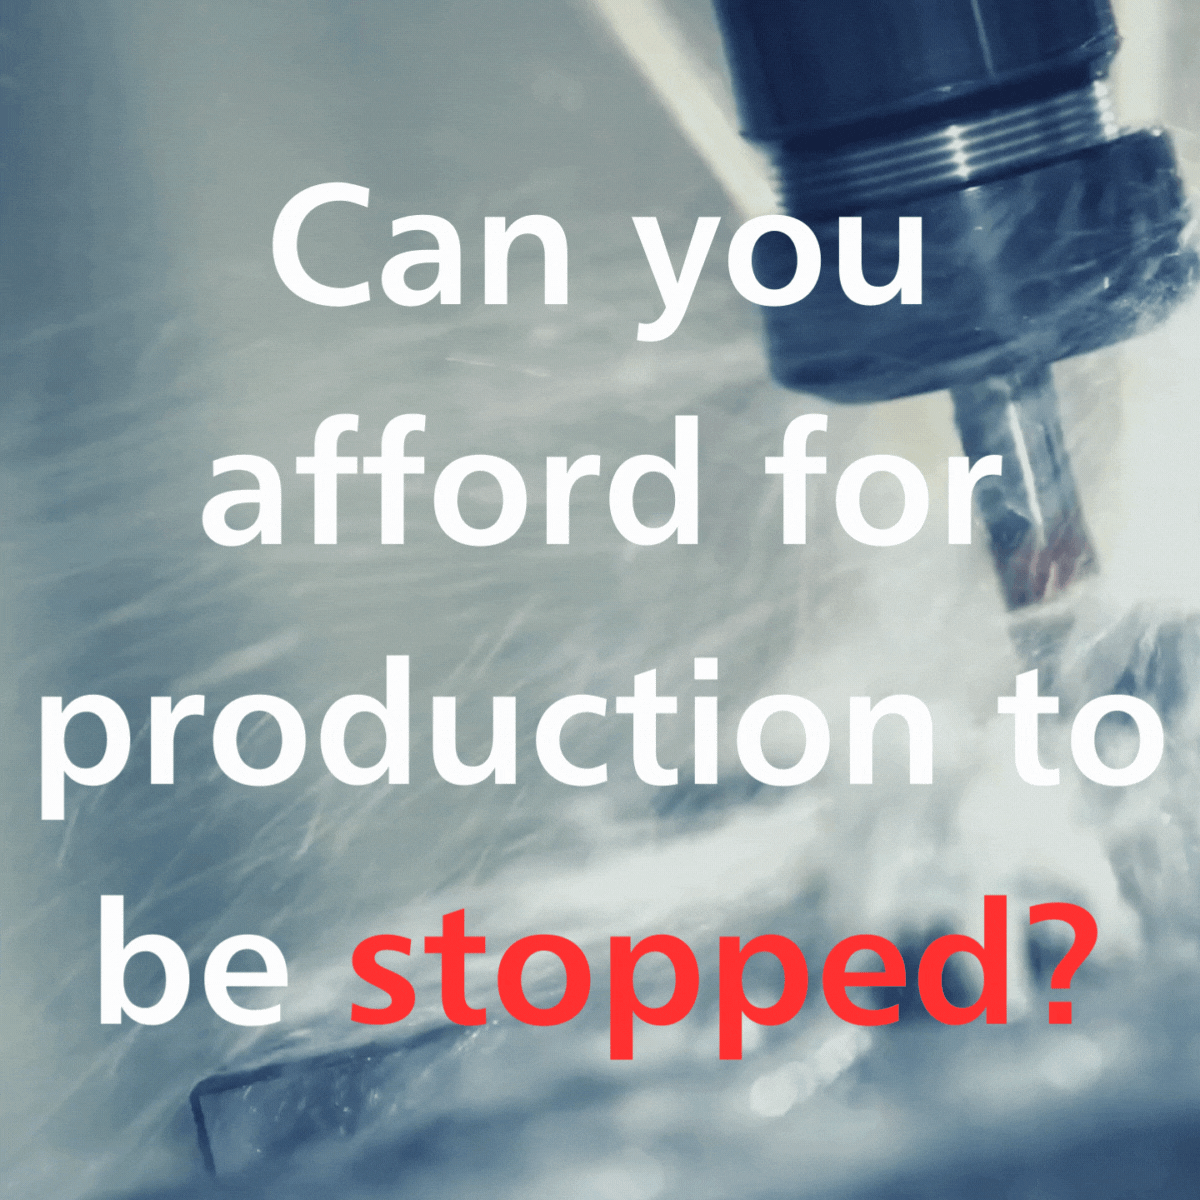 Can you afford for production to be stopped?